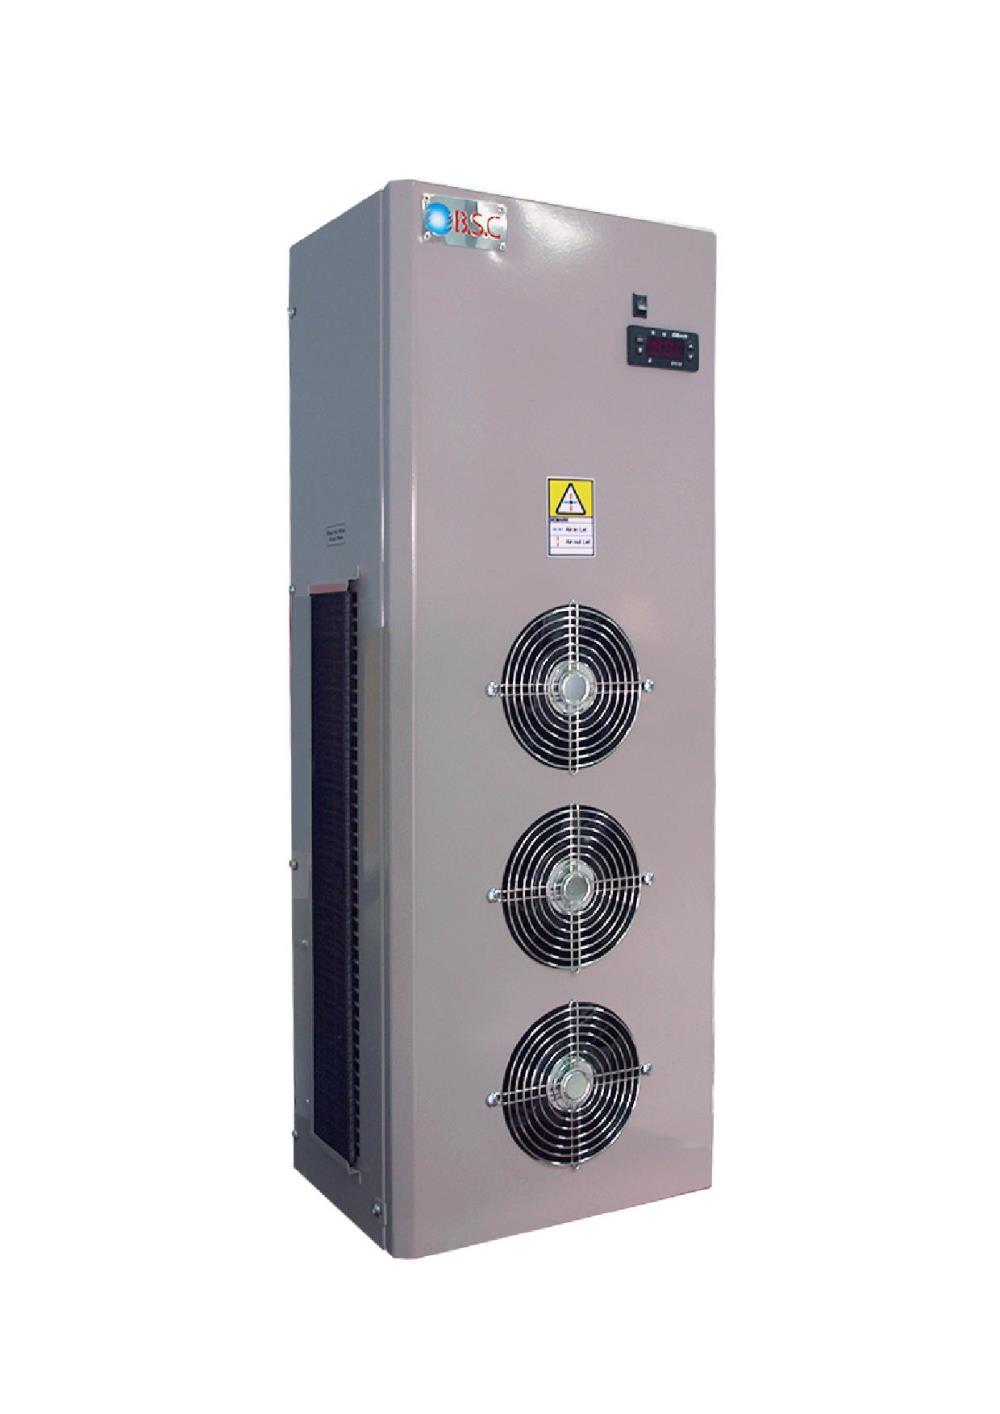 Air Condition : BSC2200-C,แอร์ตู้คอนโทรล,BSC,Plant and Facility Equipment/HVAC/Air Conditioning